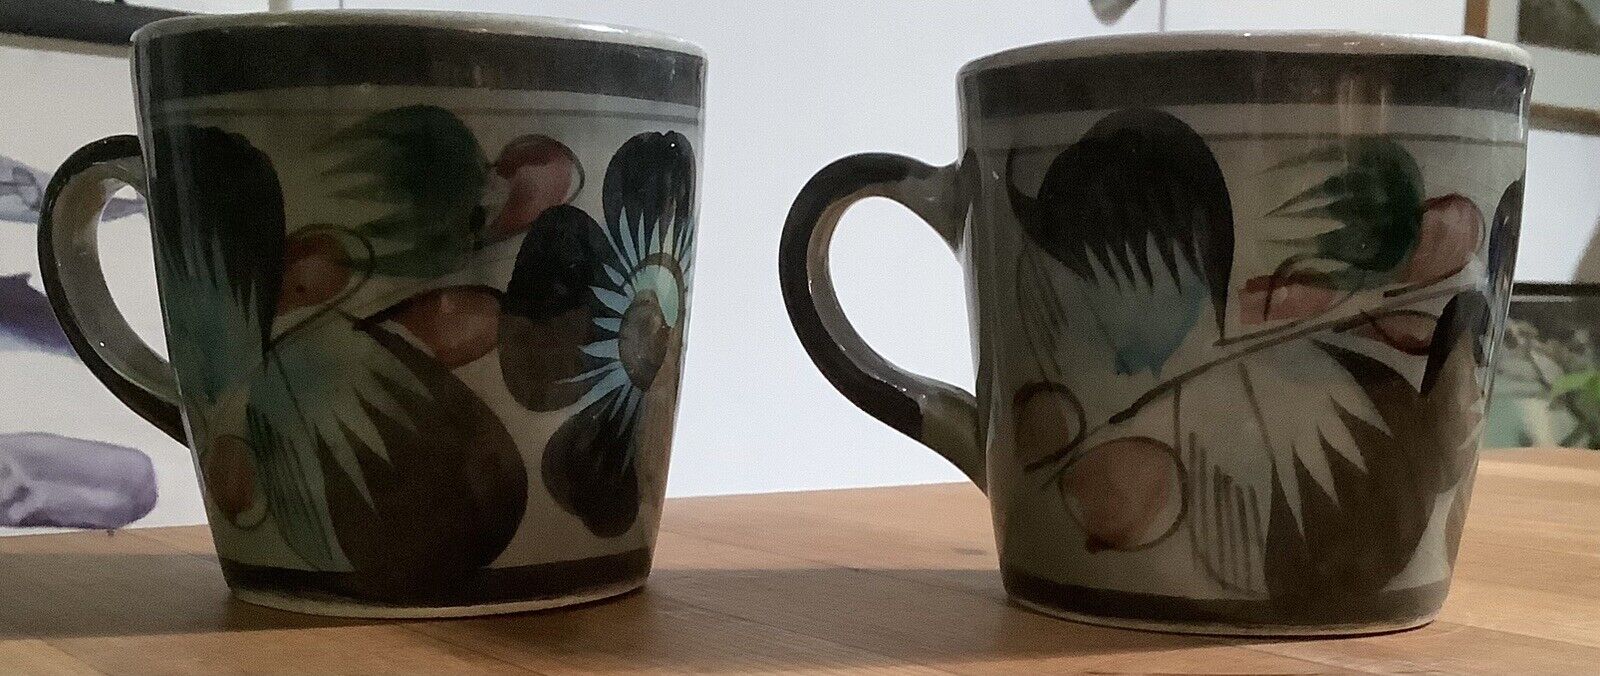 Vintage Set Of 2 Matching Hand Painted Coffee Mugs Made In Mexico